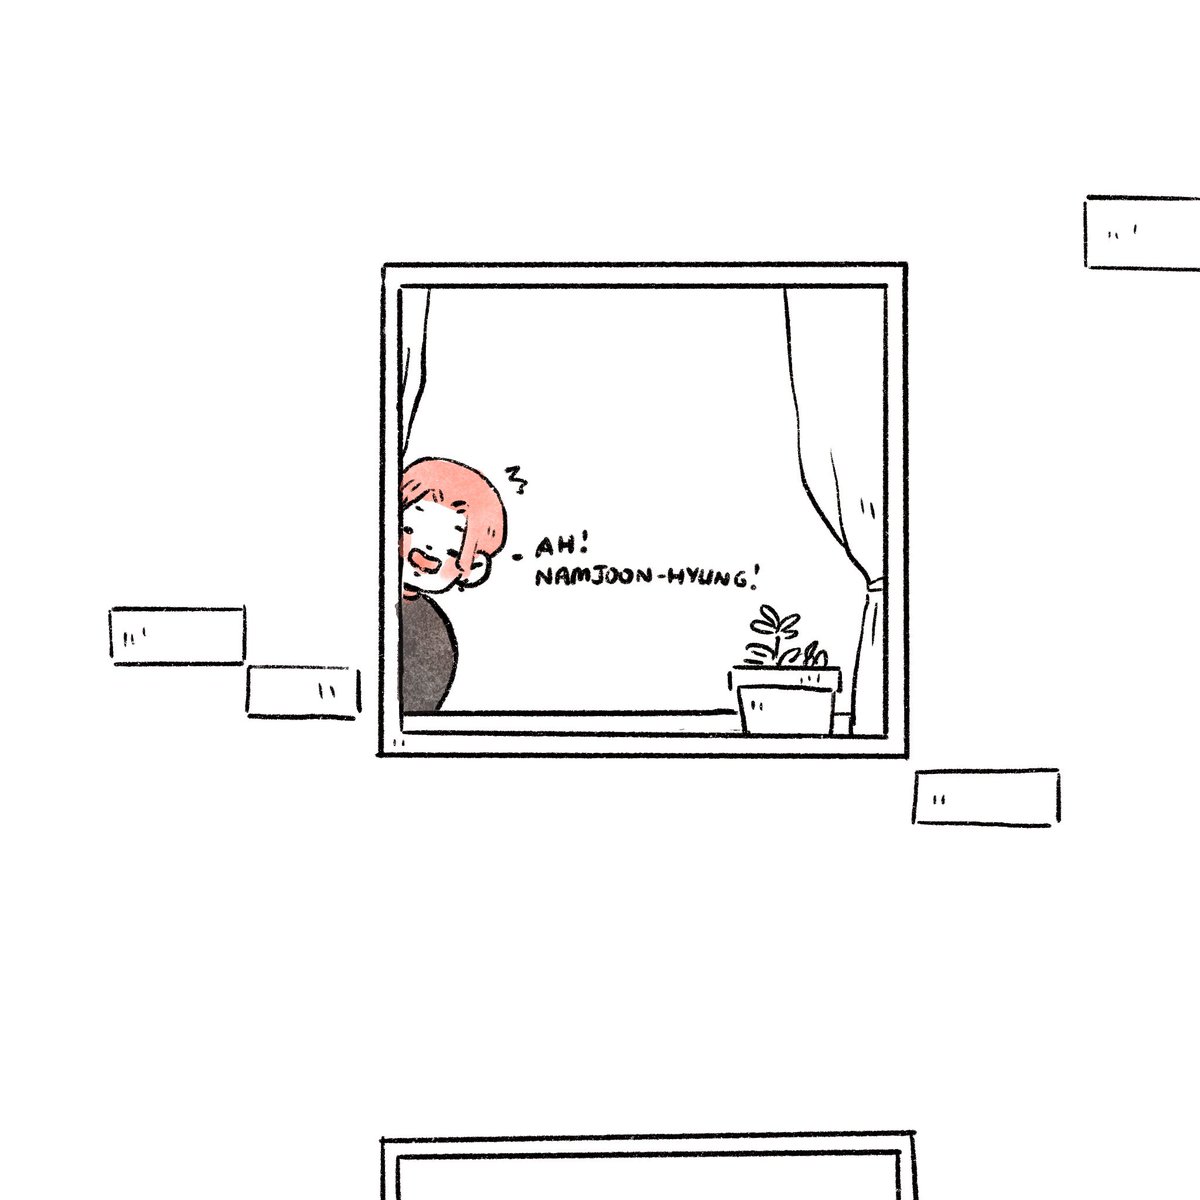 Jimin has spare eggs that he’s more than happy to share with Joon and although both buildings aren’t very far apart from each other, it’ll still take a fair bit of stretching out the window to be able to reach for anything.